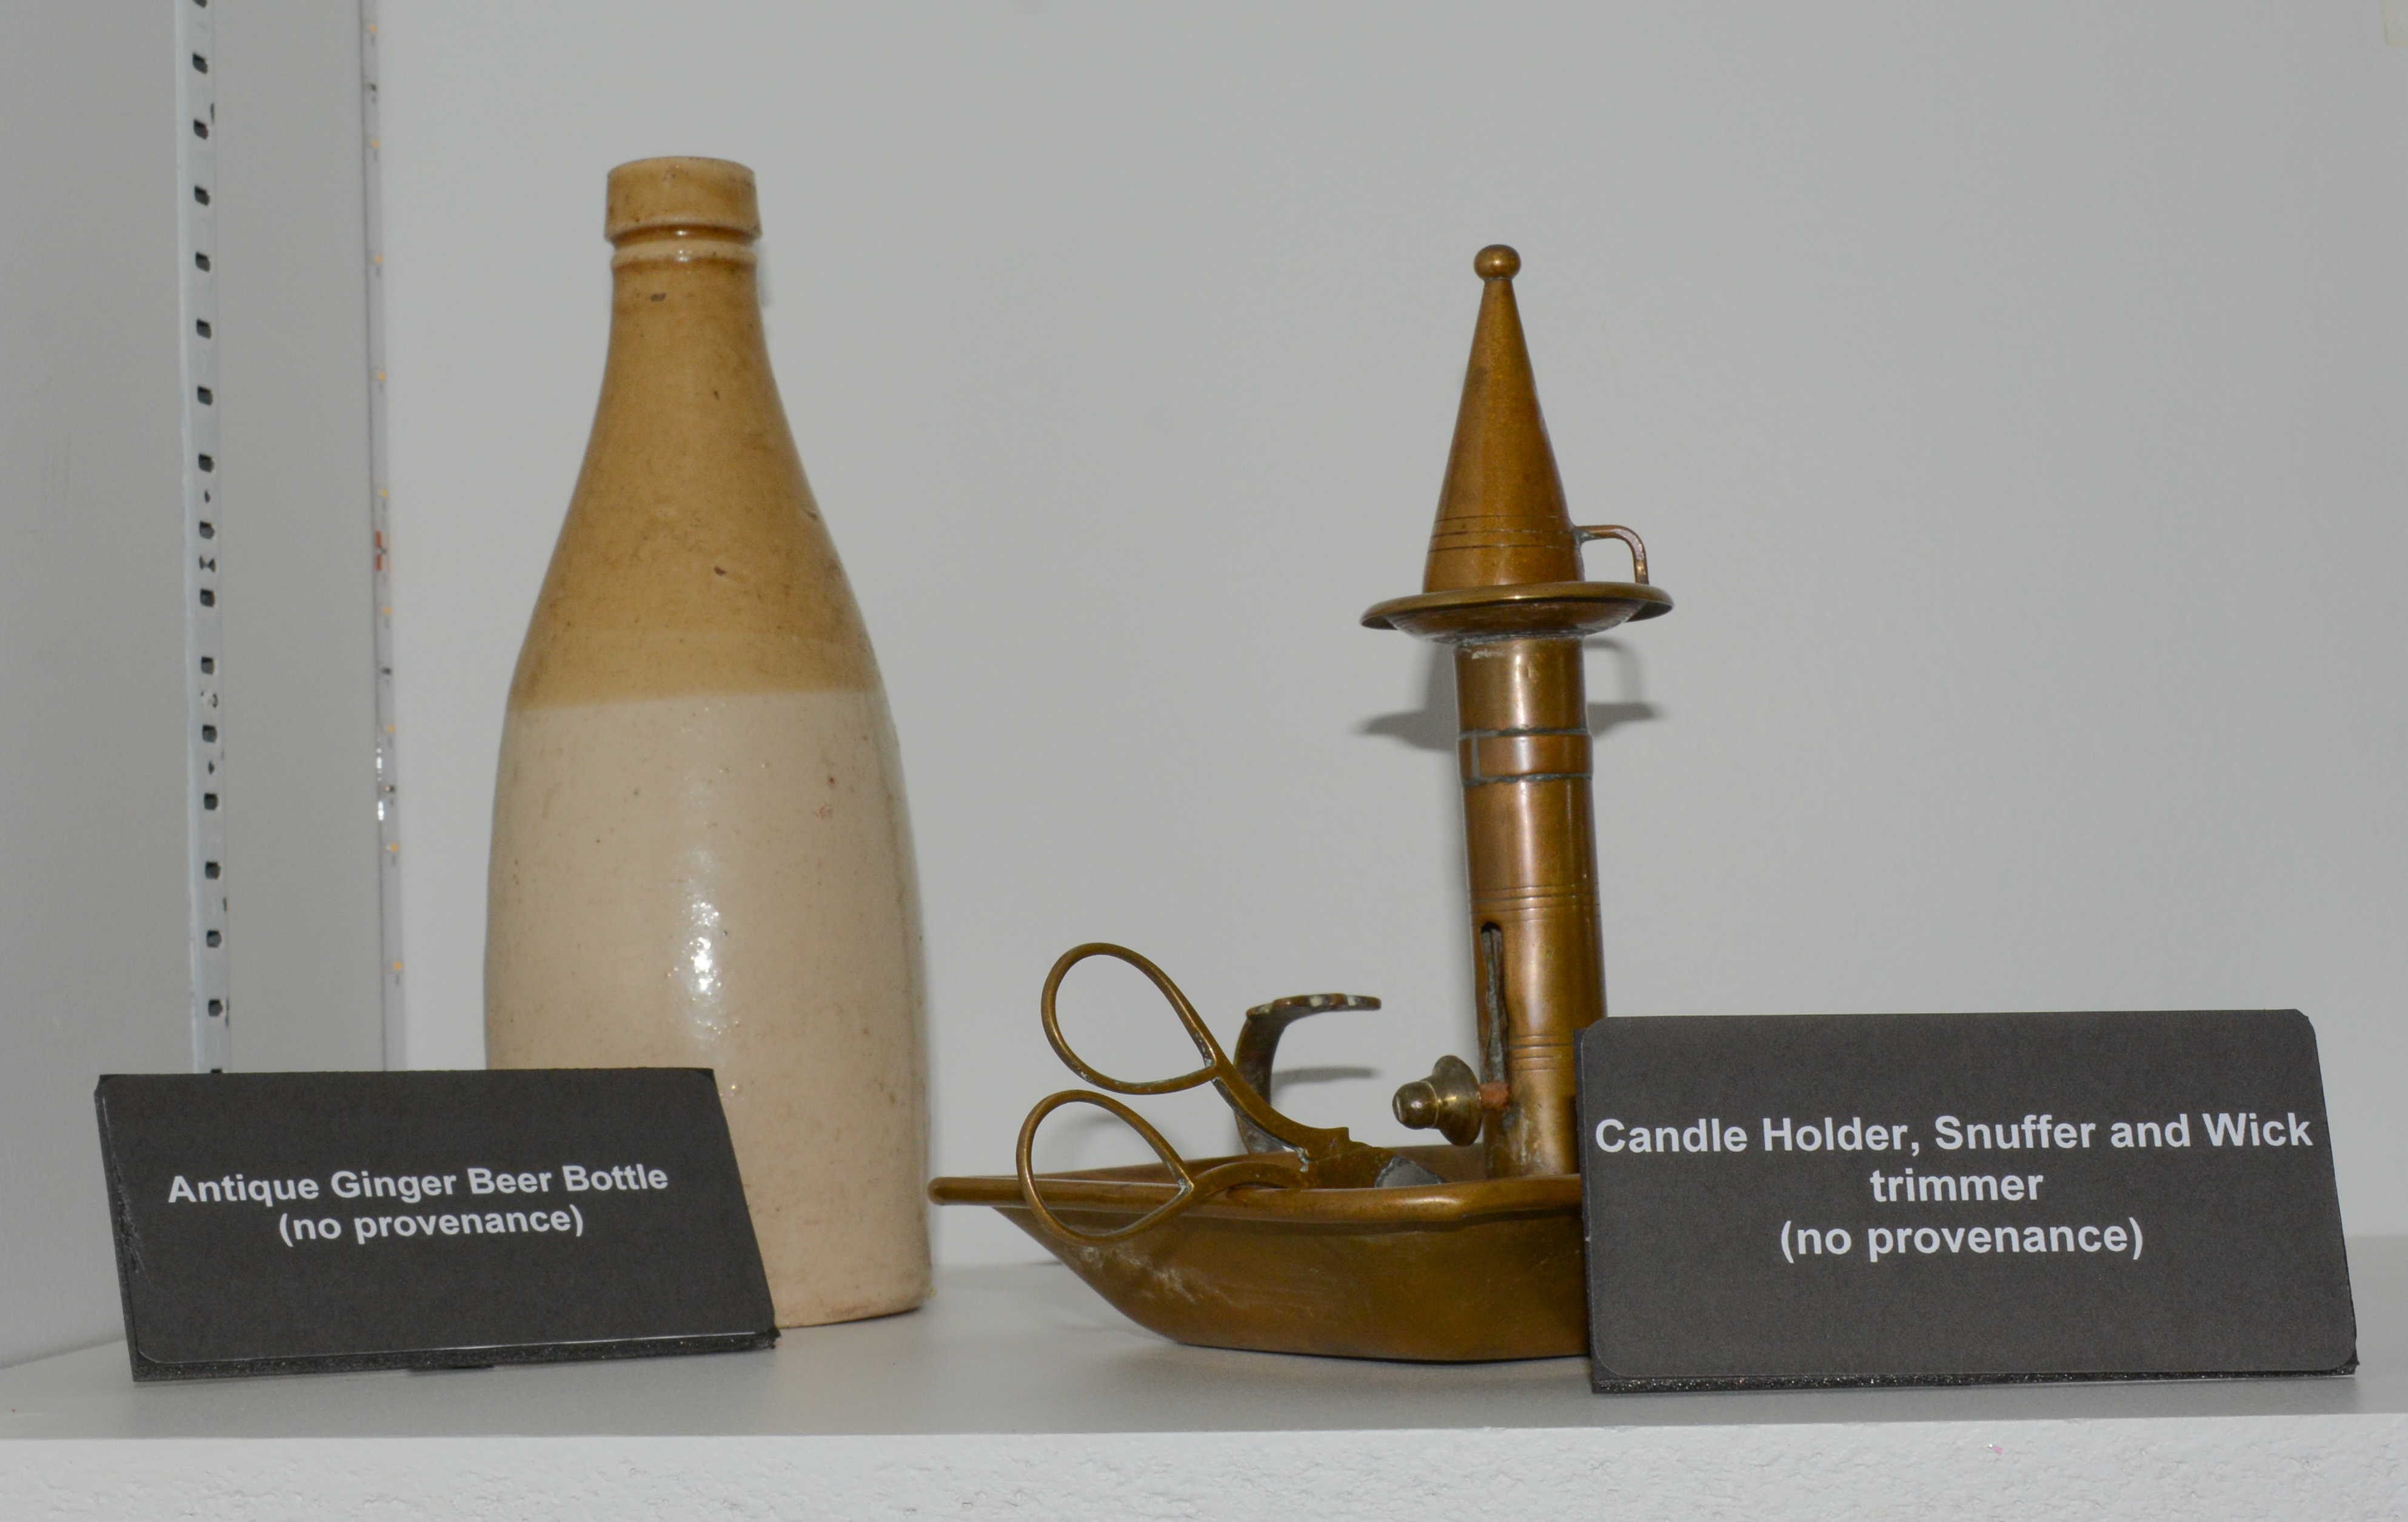 Antique Ginger Beer Bottle(left) and Candle Holder, Snuffer, and Wick trimmer(right)